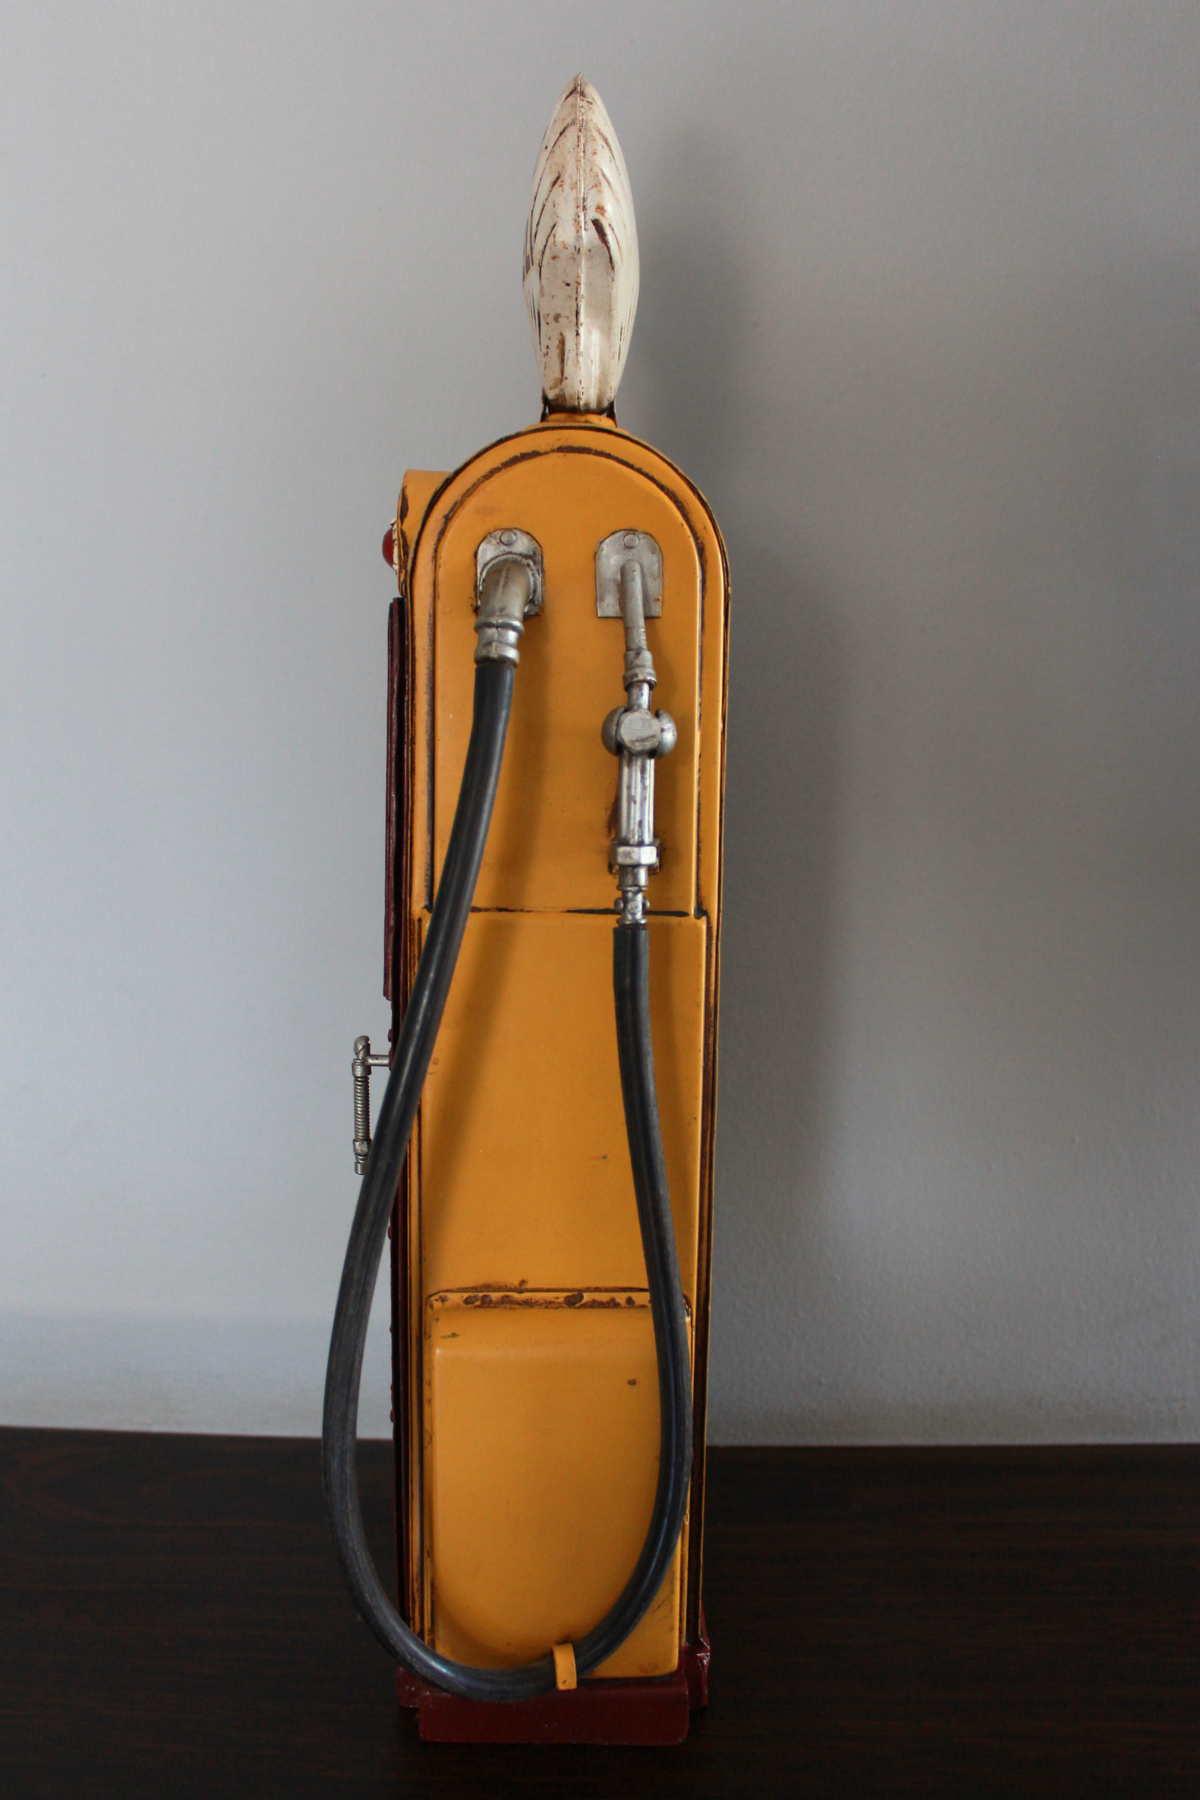 1938 Yellow Brown Shell Gas Pump Old Style Metal Model